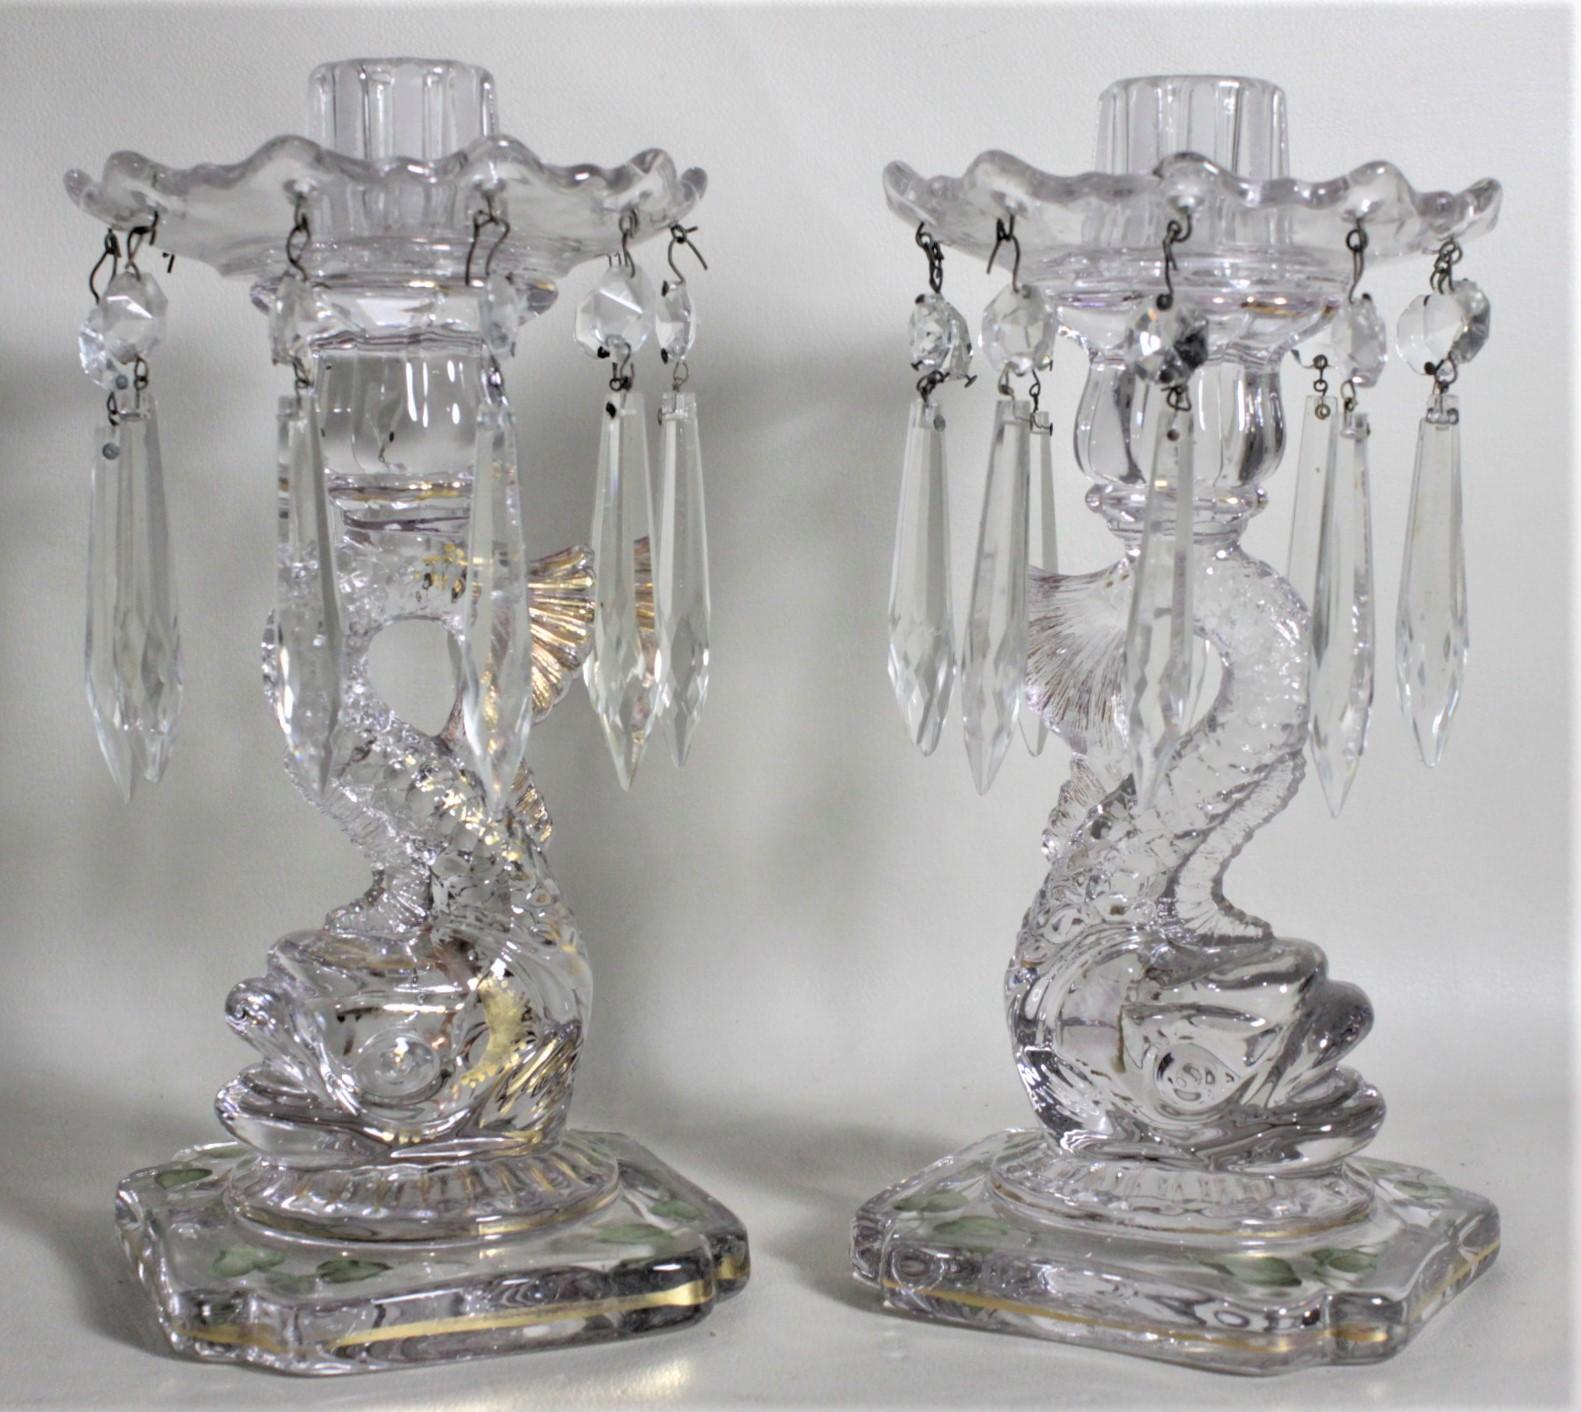 This pair of clear glass figural dolphin lustres are unsigned, but presumed to have been made in Italy in circa 1900 in the Victorian style. These candle holders are made of heavy molded clear glass and depict detailed stylized dolphins with gilt